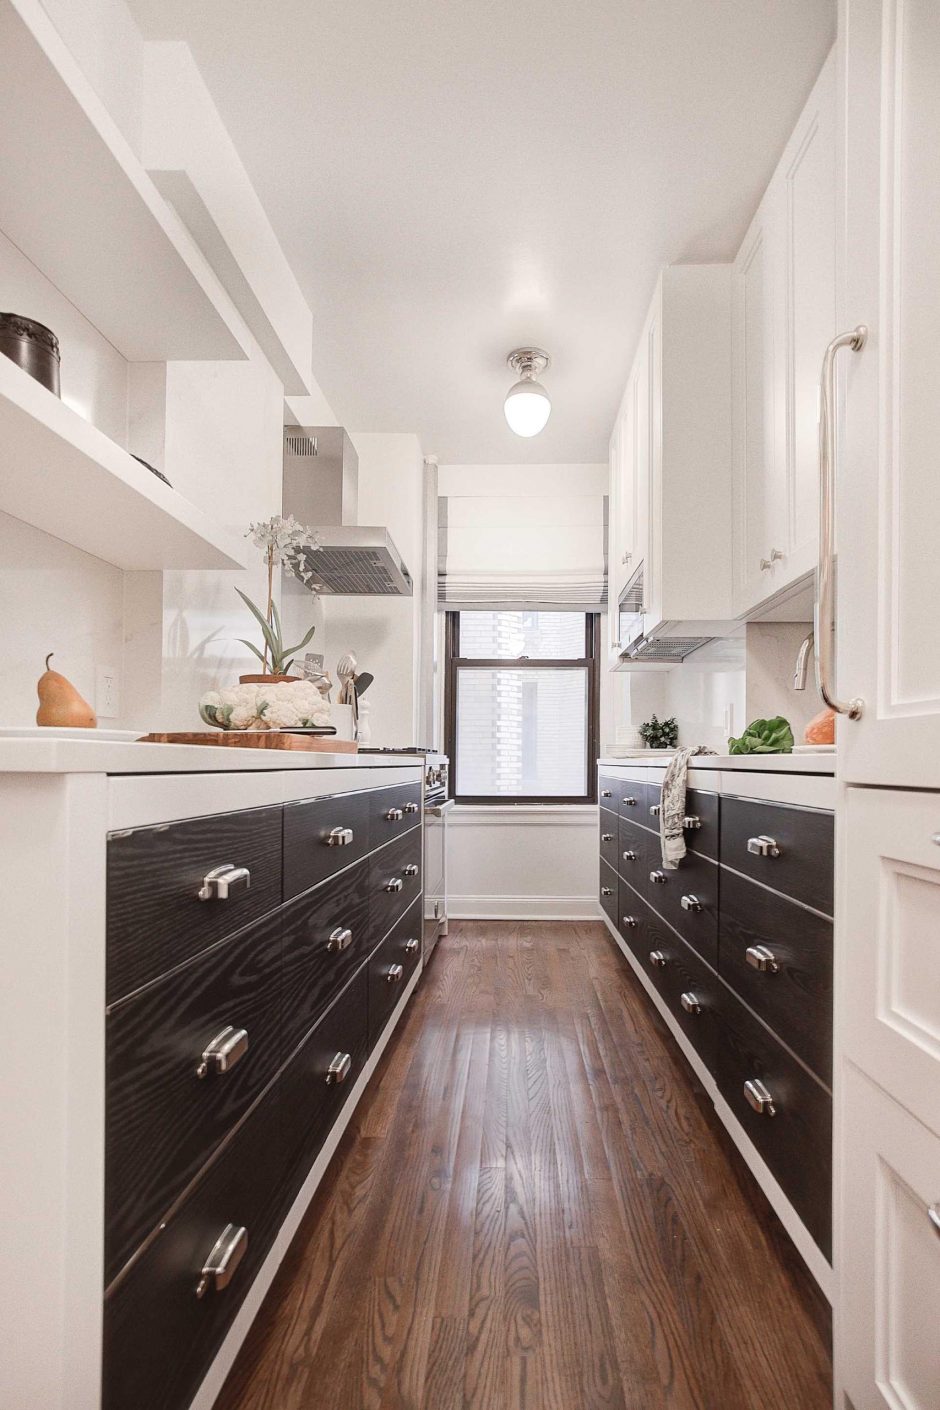 Before And After - The Remodel Of A Small And Dated Galley Kitchen